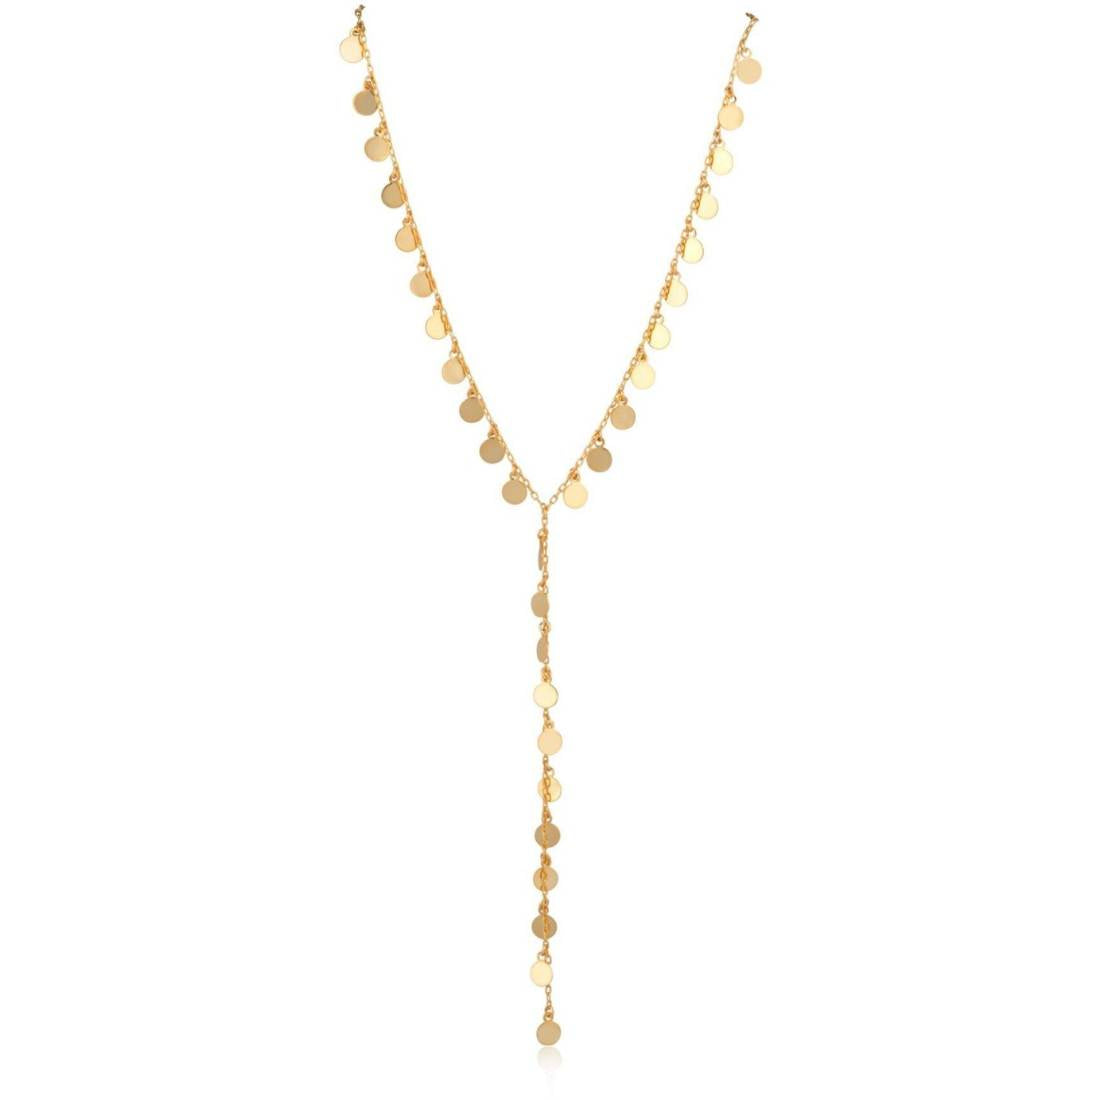 Cha Cha Lariat Necklace in gold